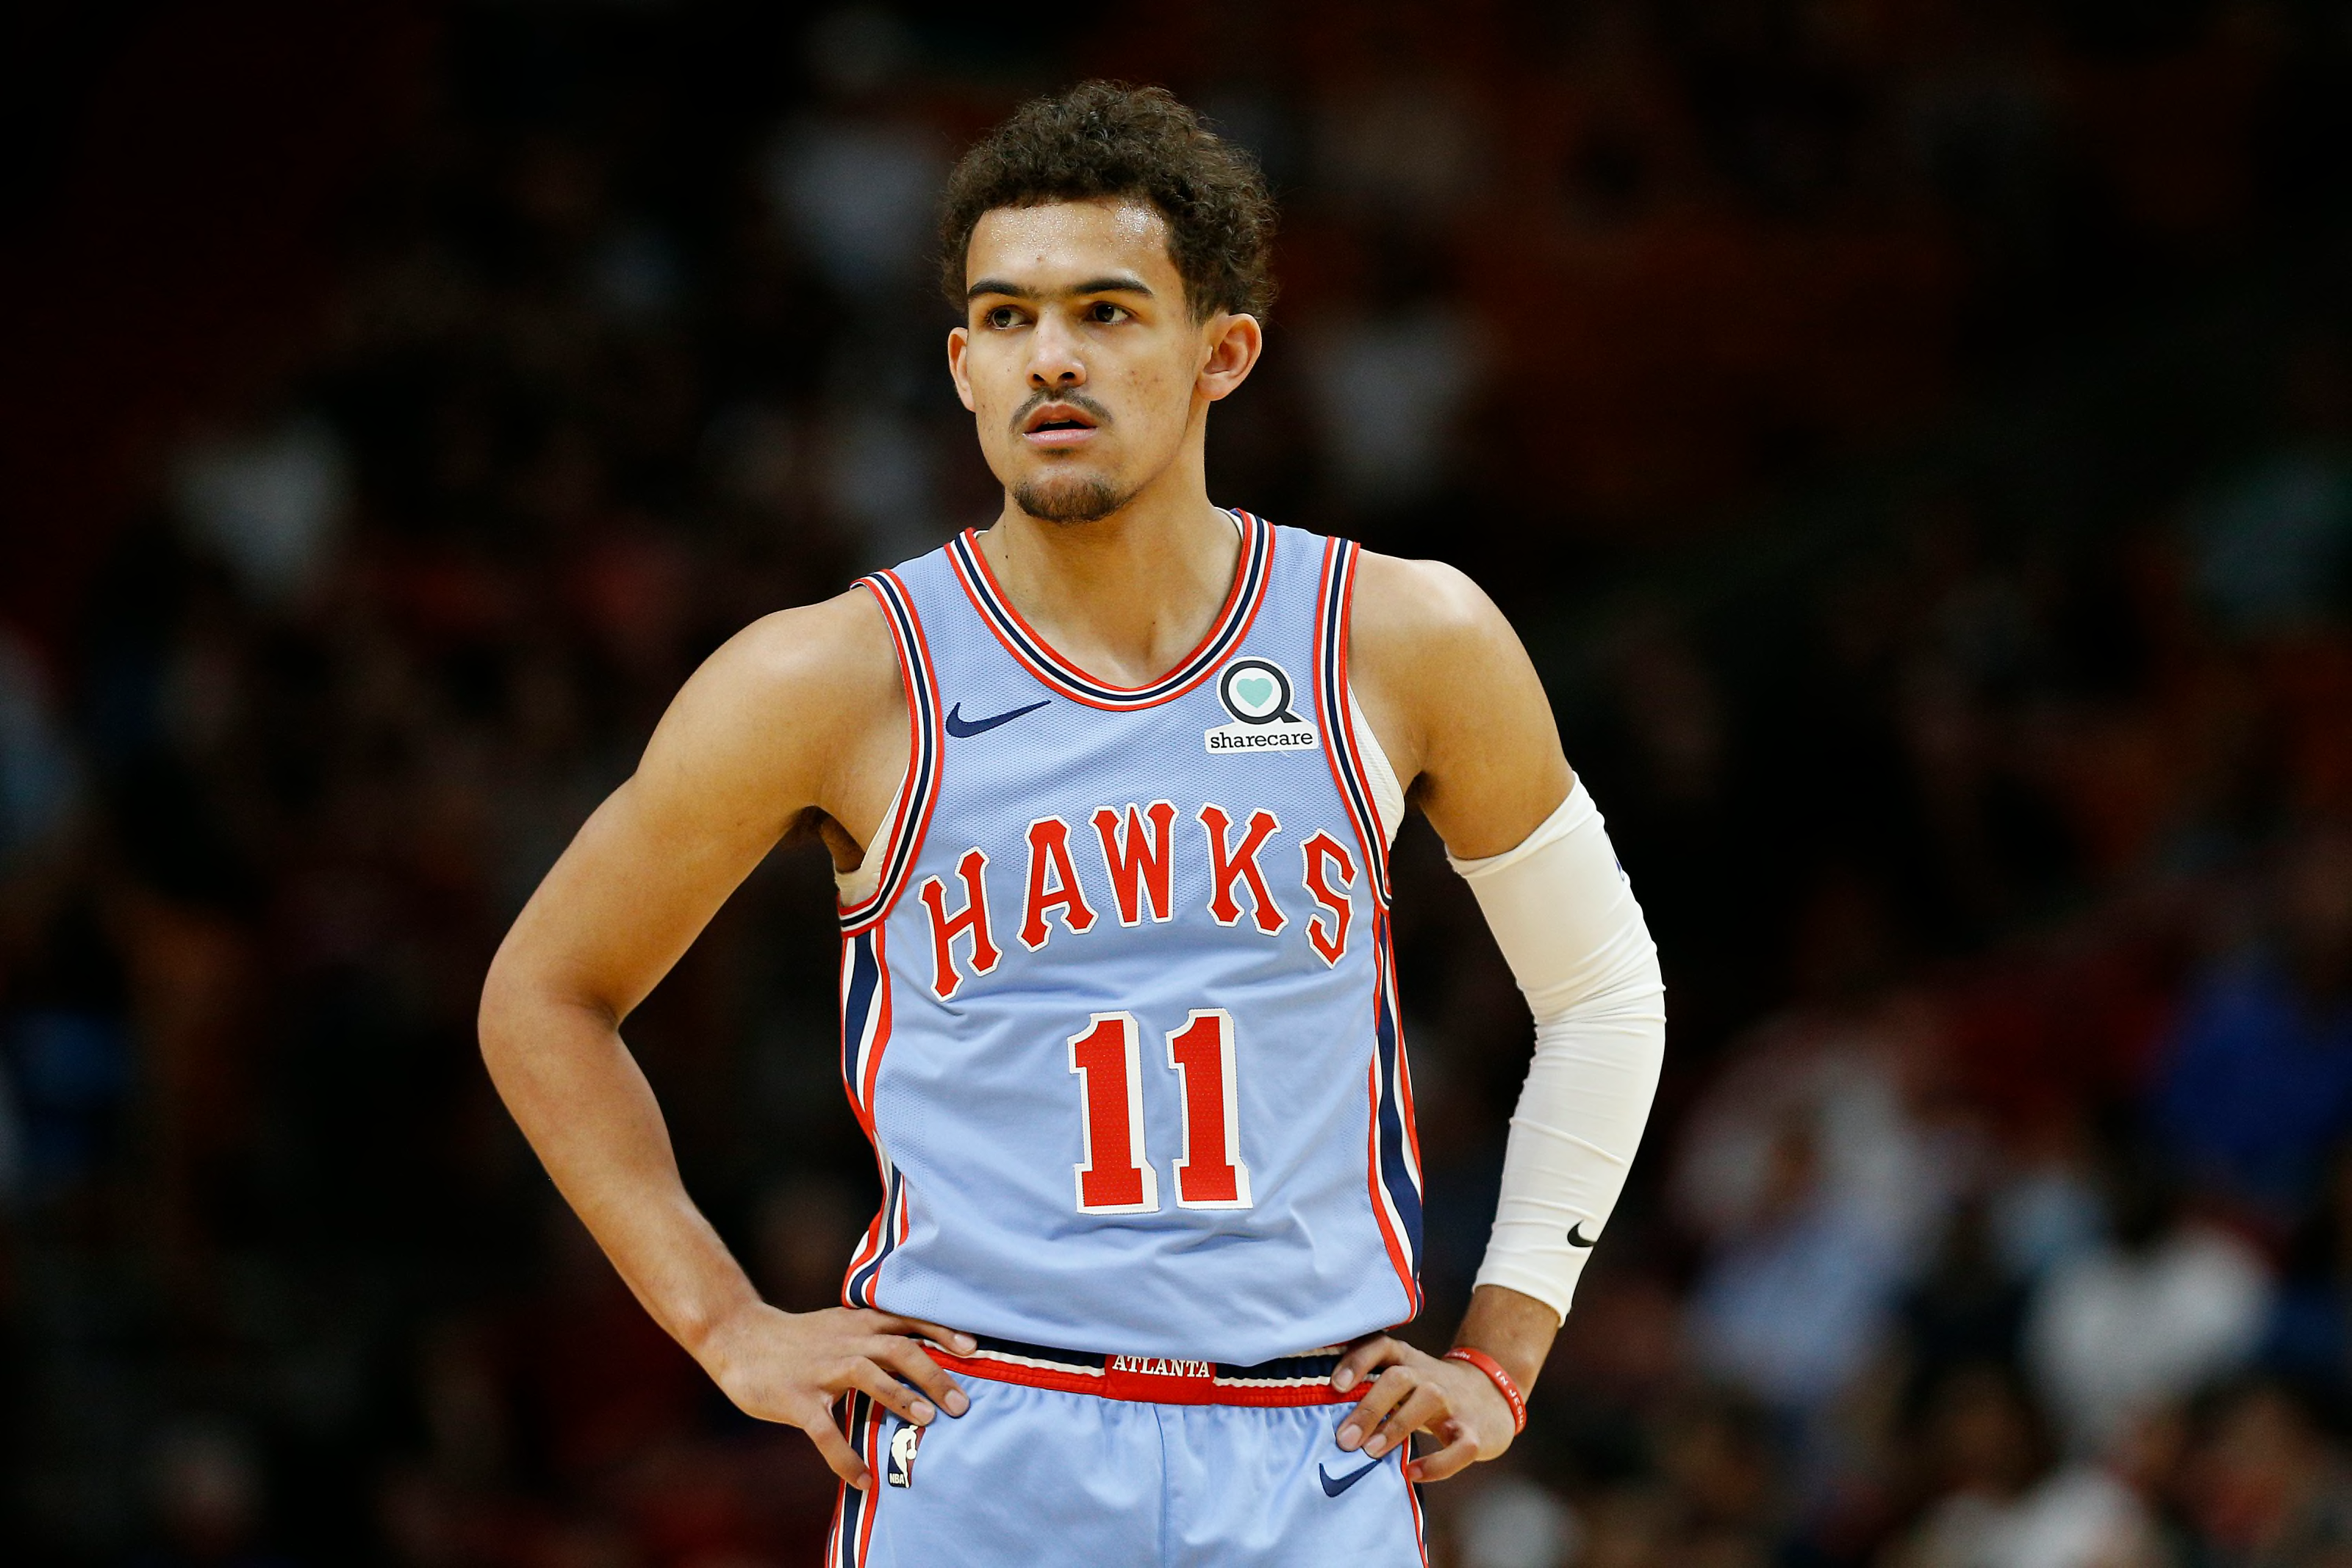 Trae Young of the Atlanta Hawks stands during player introductions